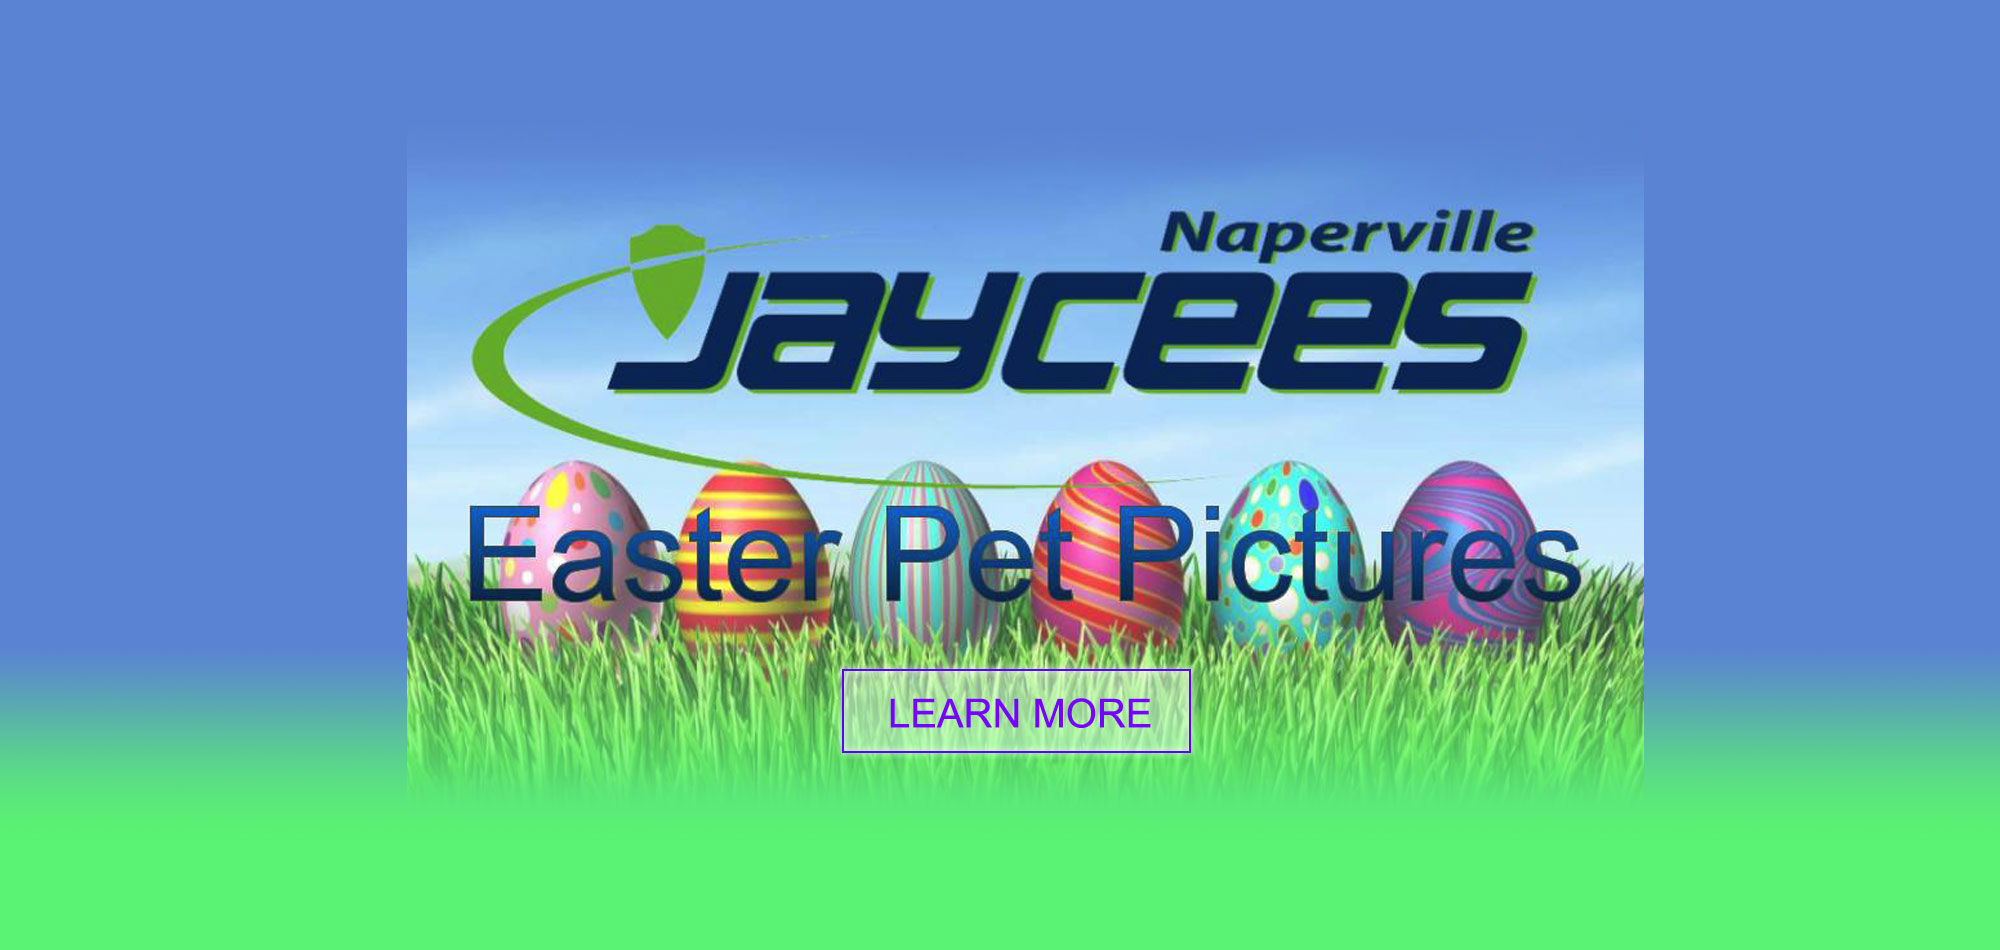 March Philanthropy Event: Easter Pet Pictures @ Two Bostons